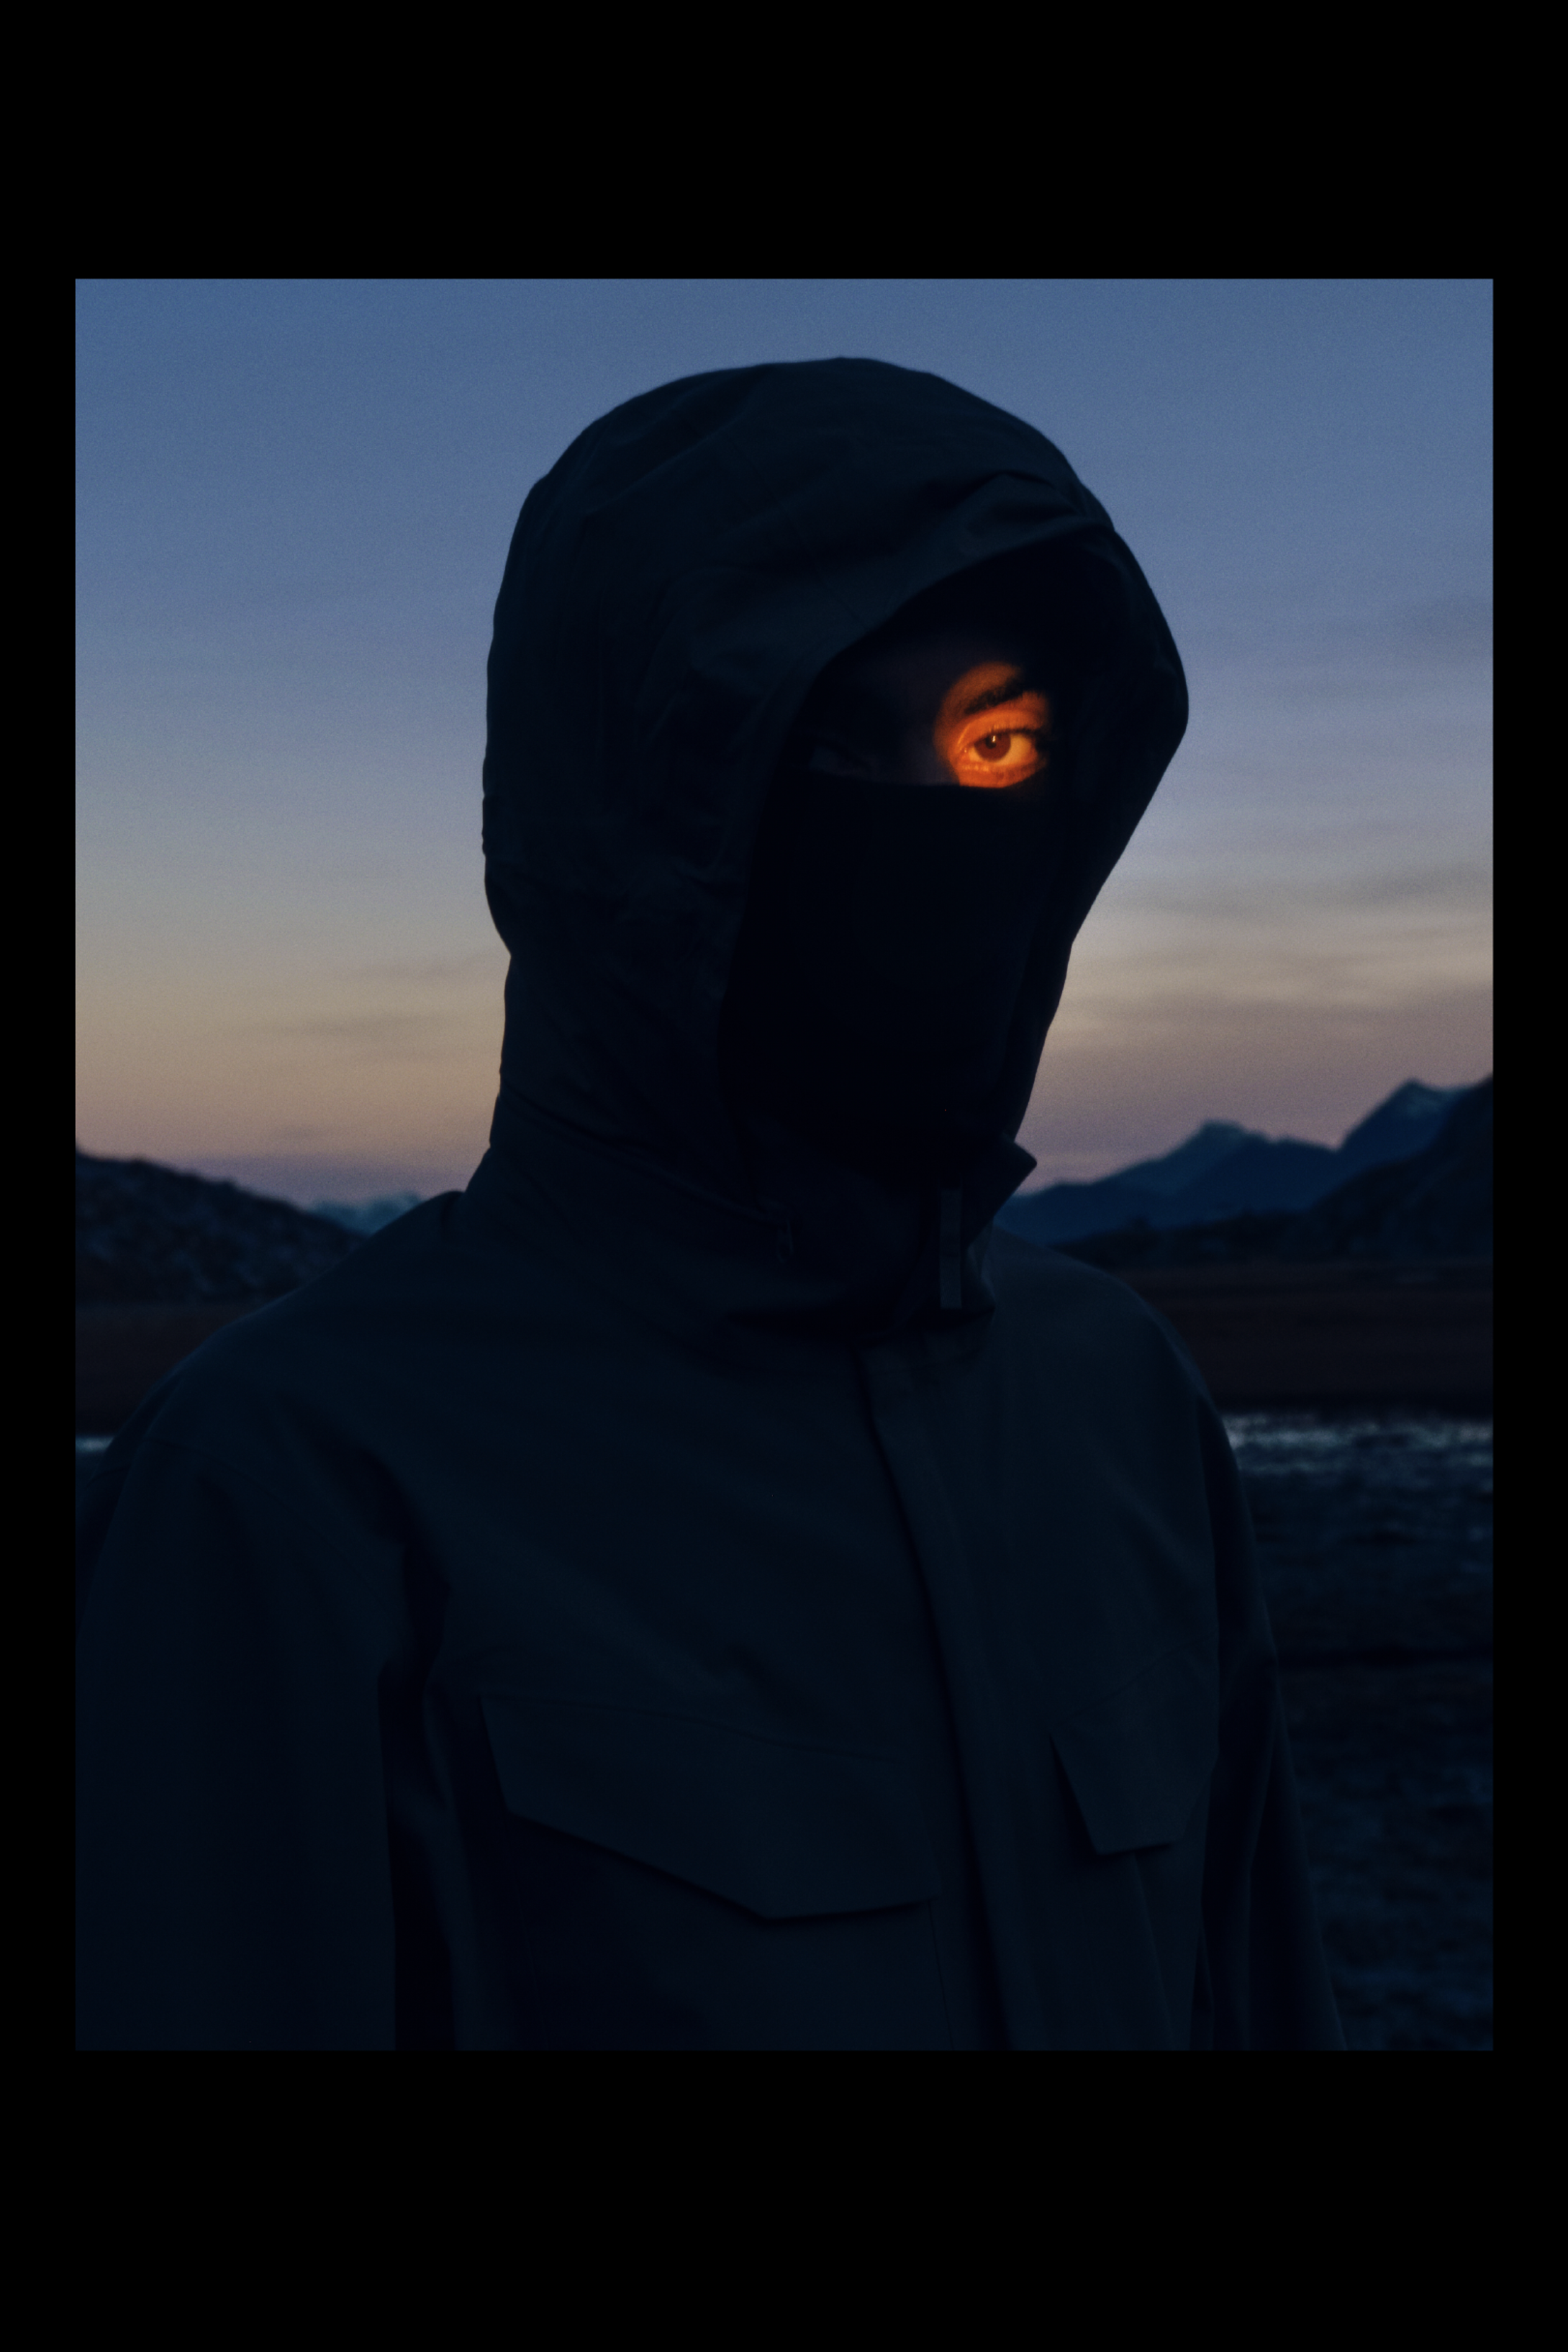 Photography of a dark dressed person in front of mountains